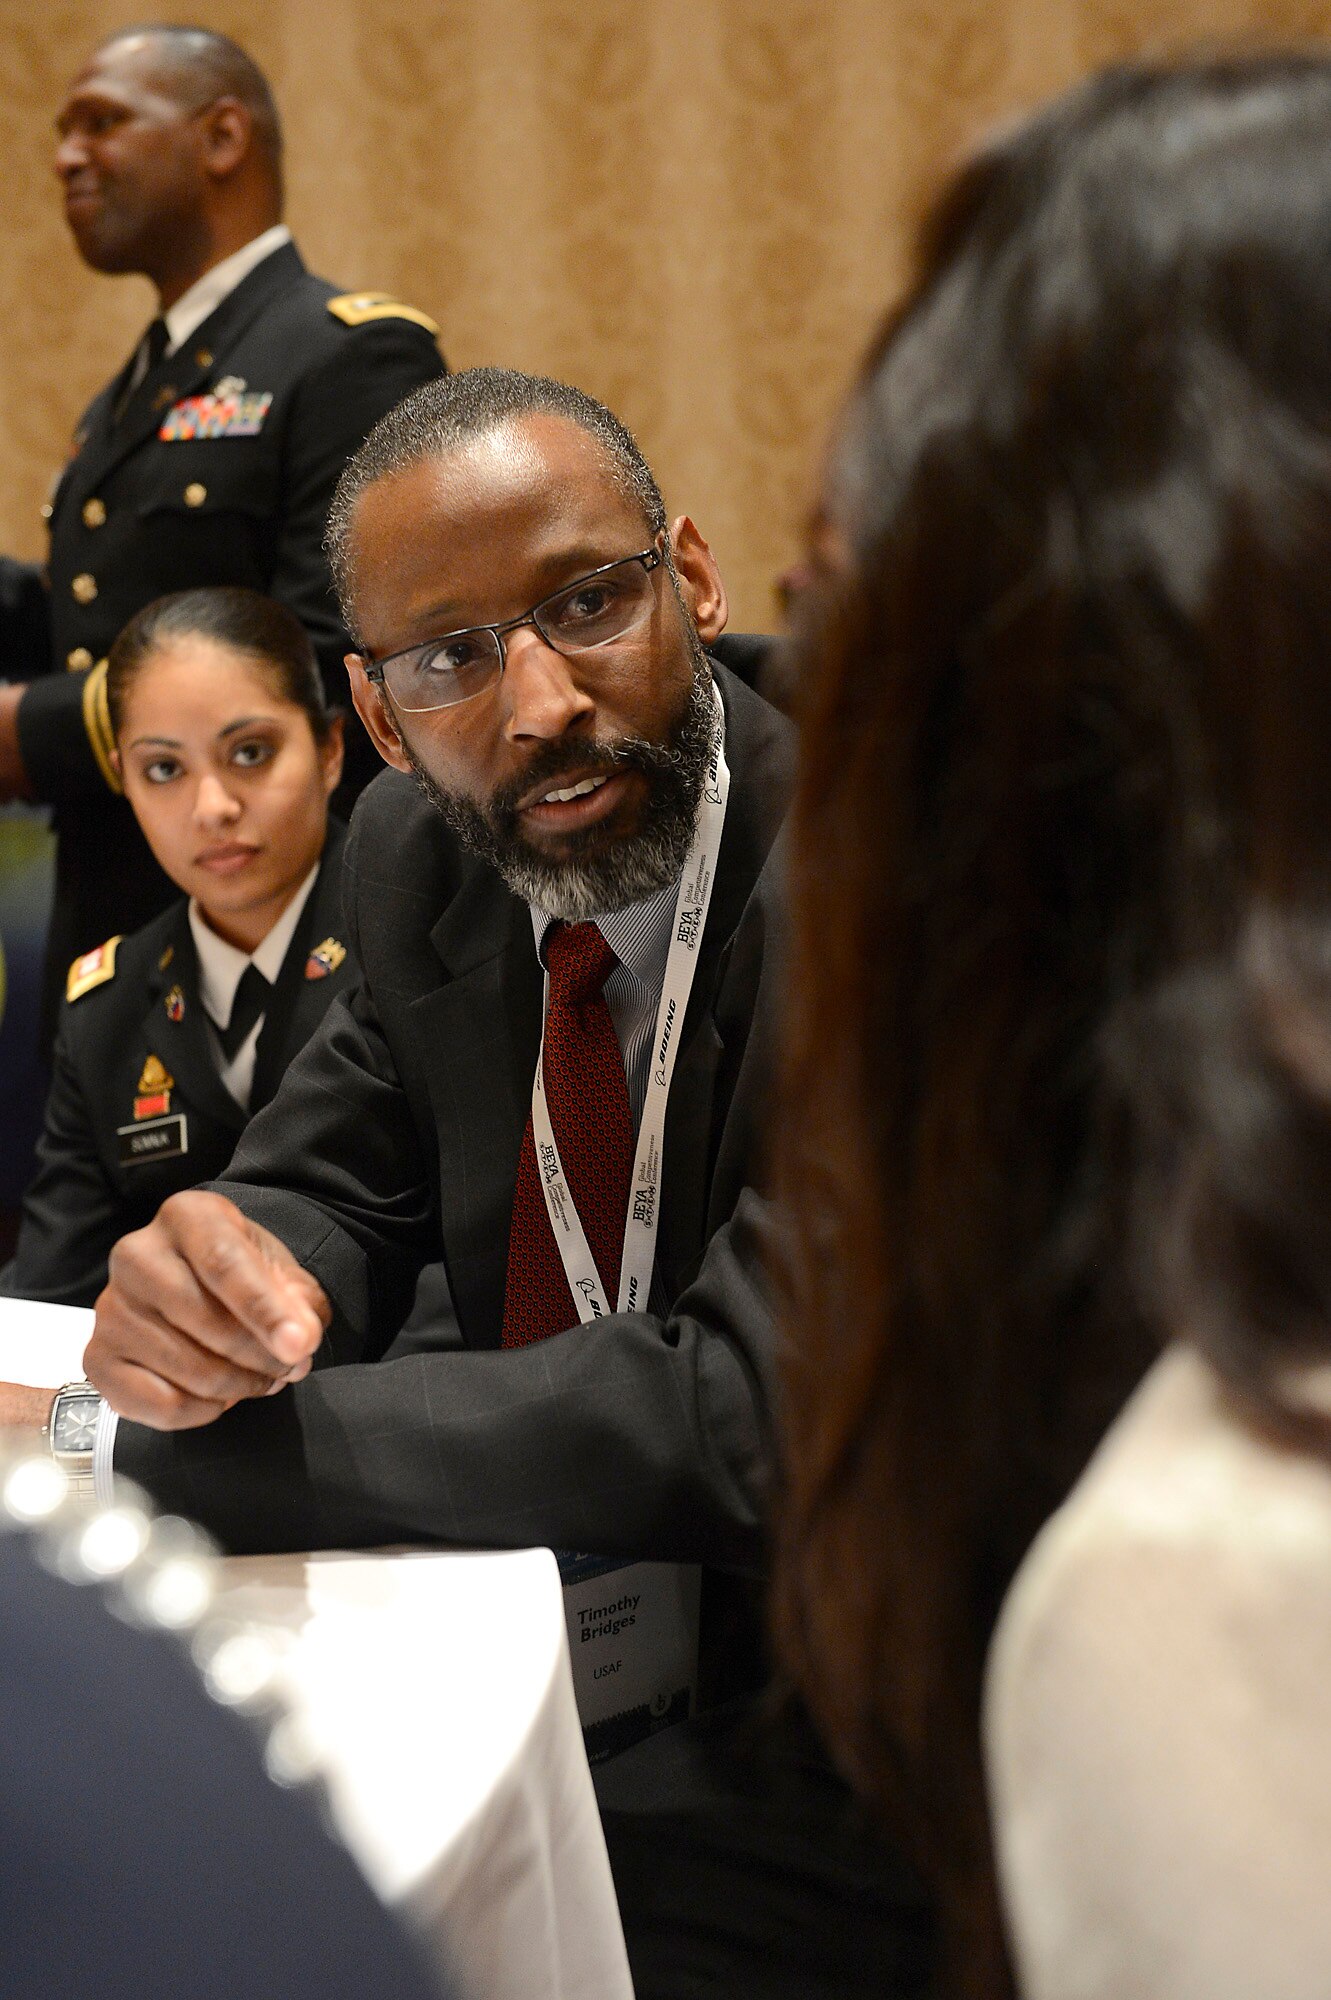 Timothy K. Bridges, Deputy Assistant Secretary of the Air Force for Installations, Headquarters Air Force, Pentagon, Washington, D.C., talks with Giselle Gonzales, of Hayfield Secondary School, Alexandria, Va., during the Black Engineer of the Year Science, Technology Engineering and Mathematics conference, during mentorship session in Washington, D.C., Feb. 7, 2014.  (U.S. Air Force photo/Scott M. Ash)